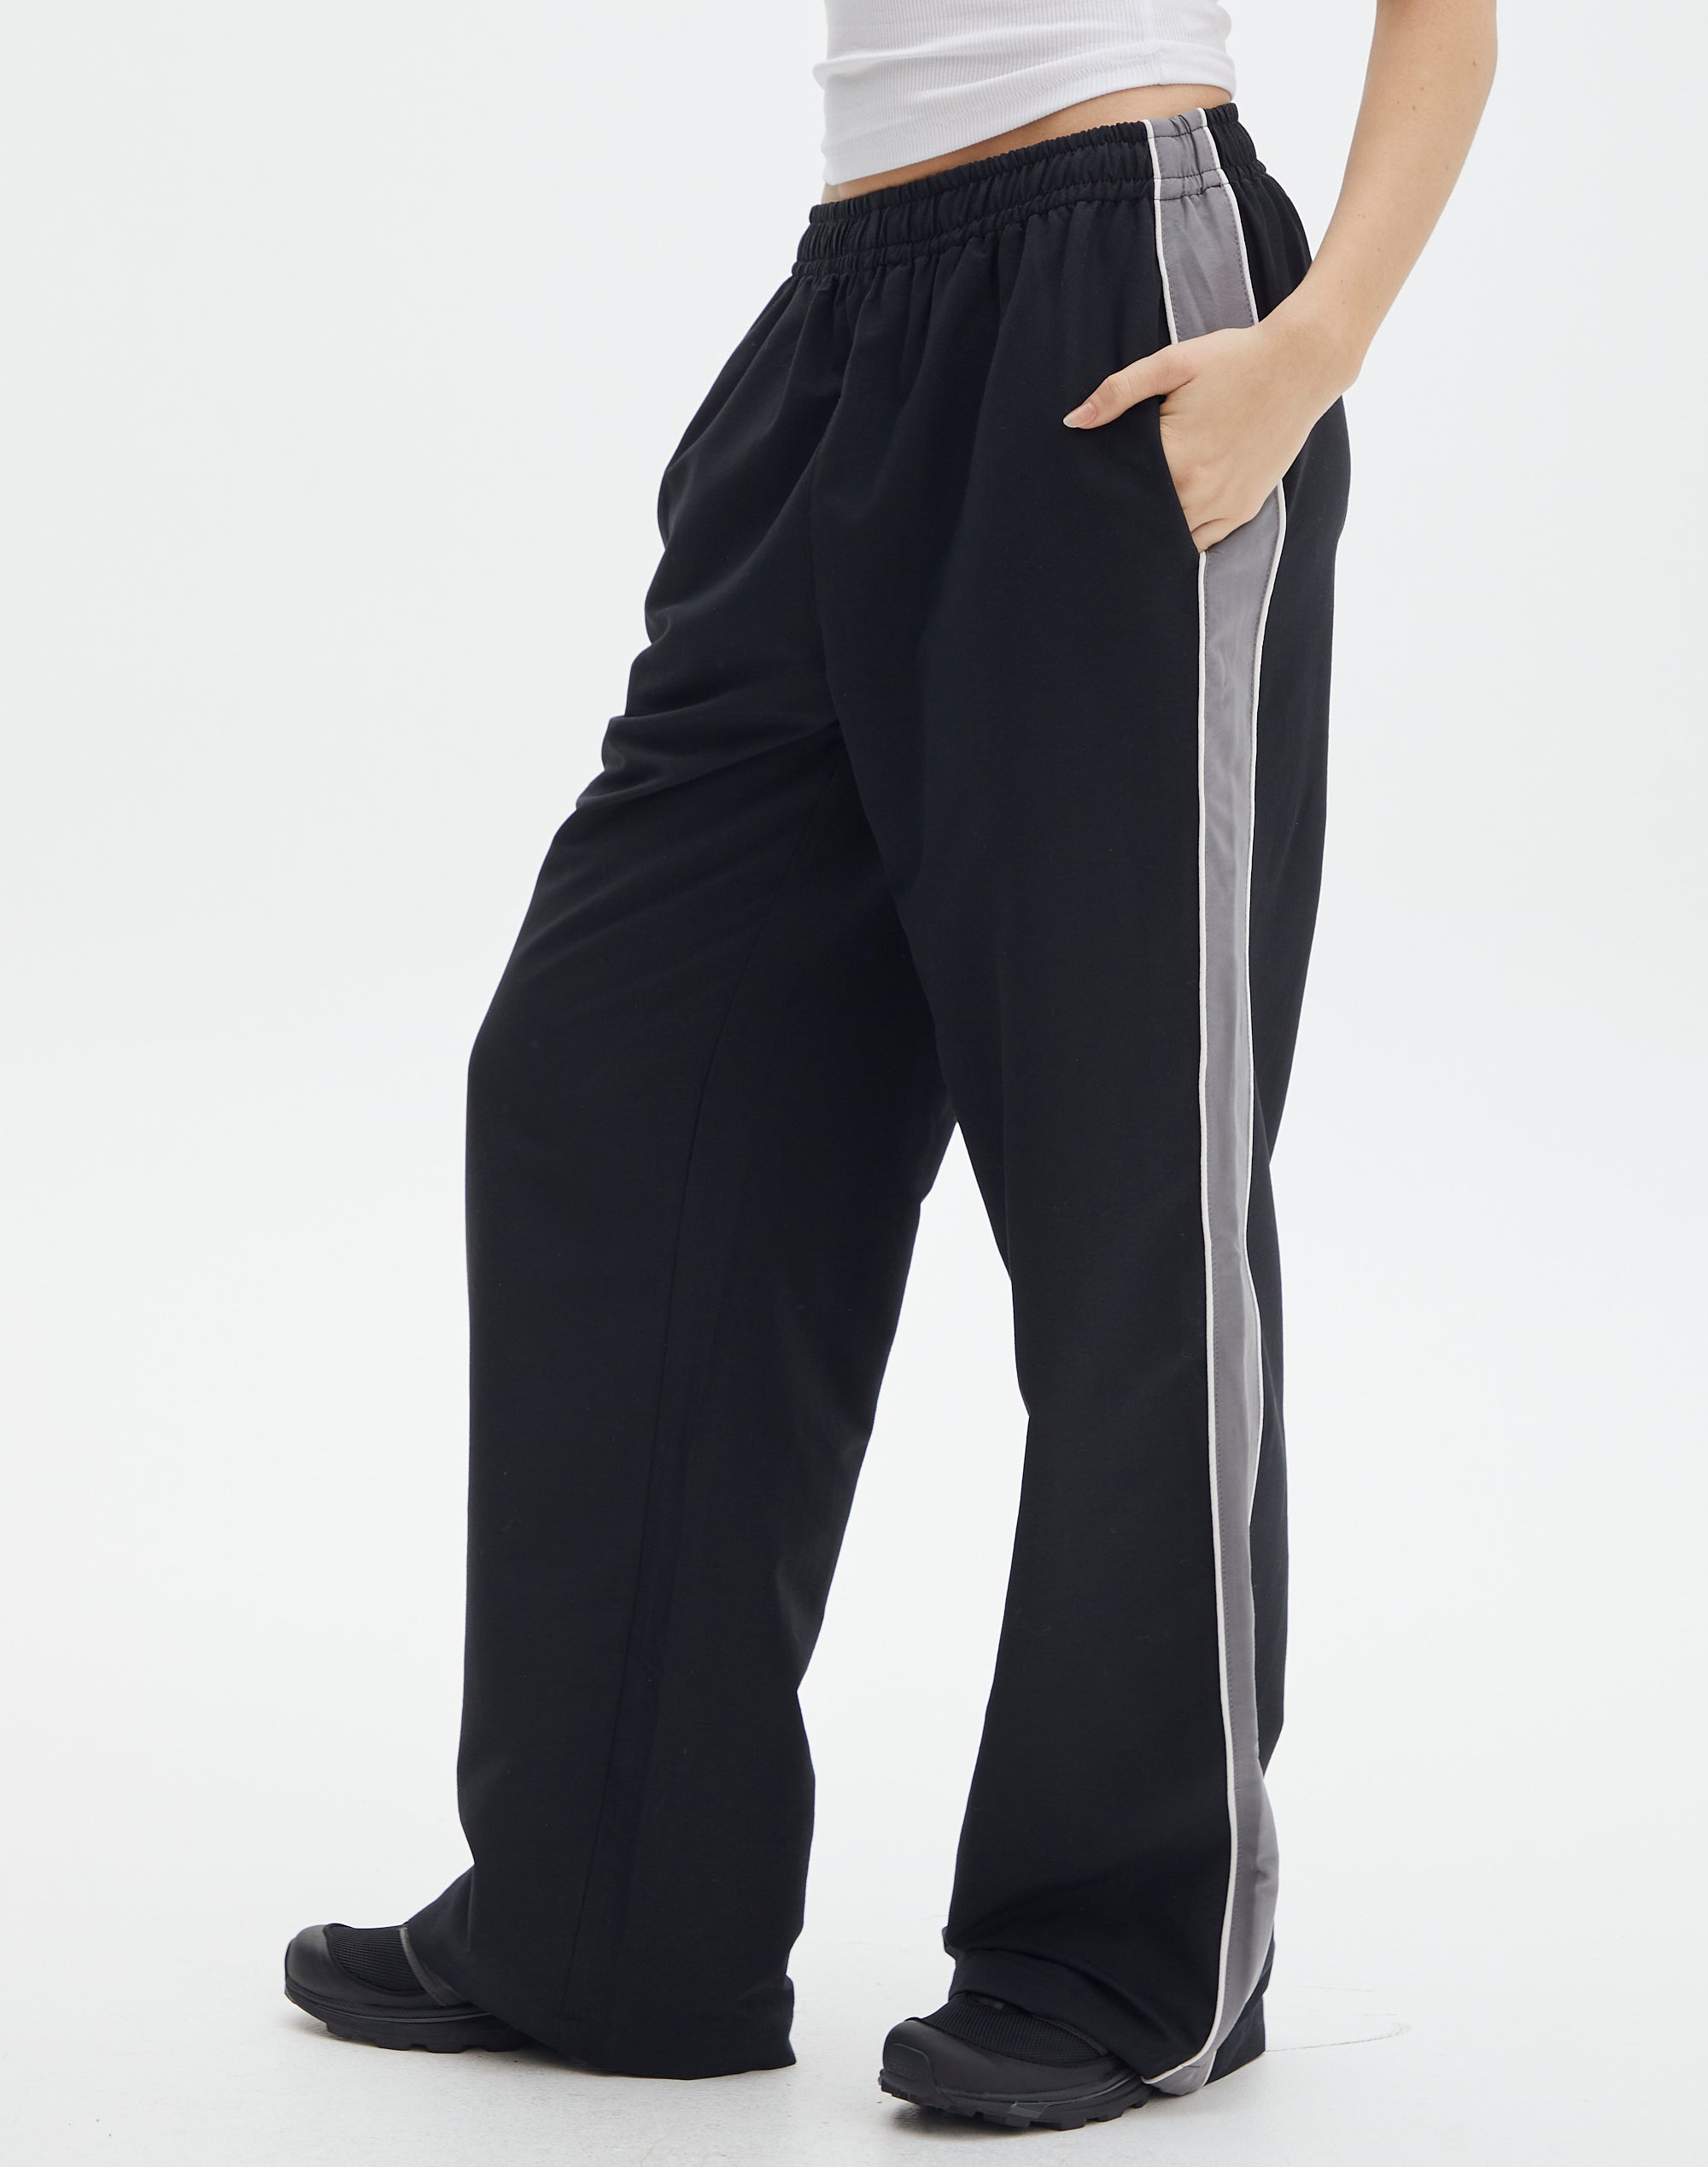 Black Wide Leg Joggers with Gold Stripe Detail